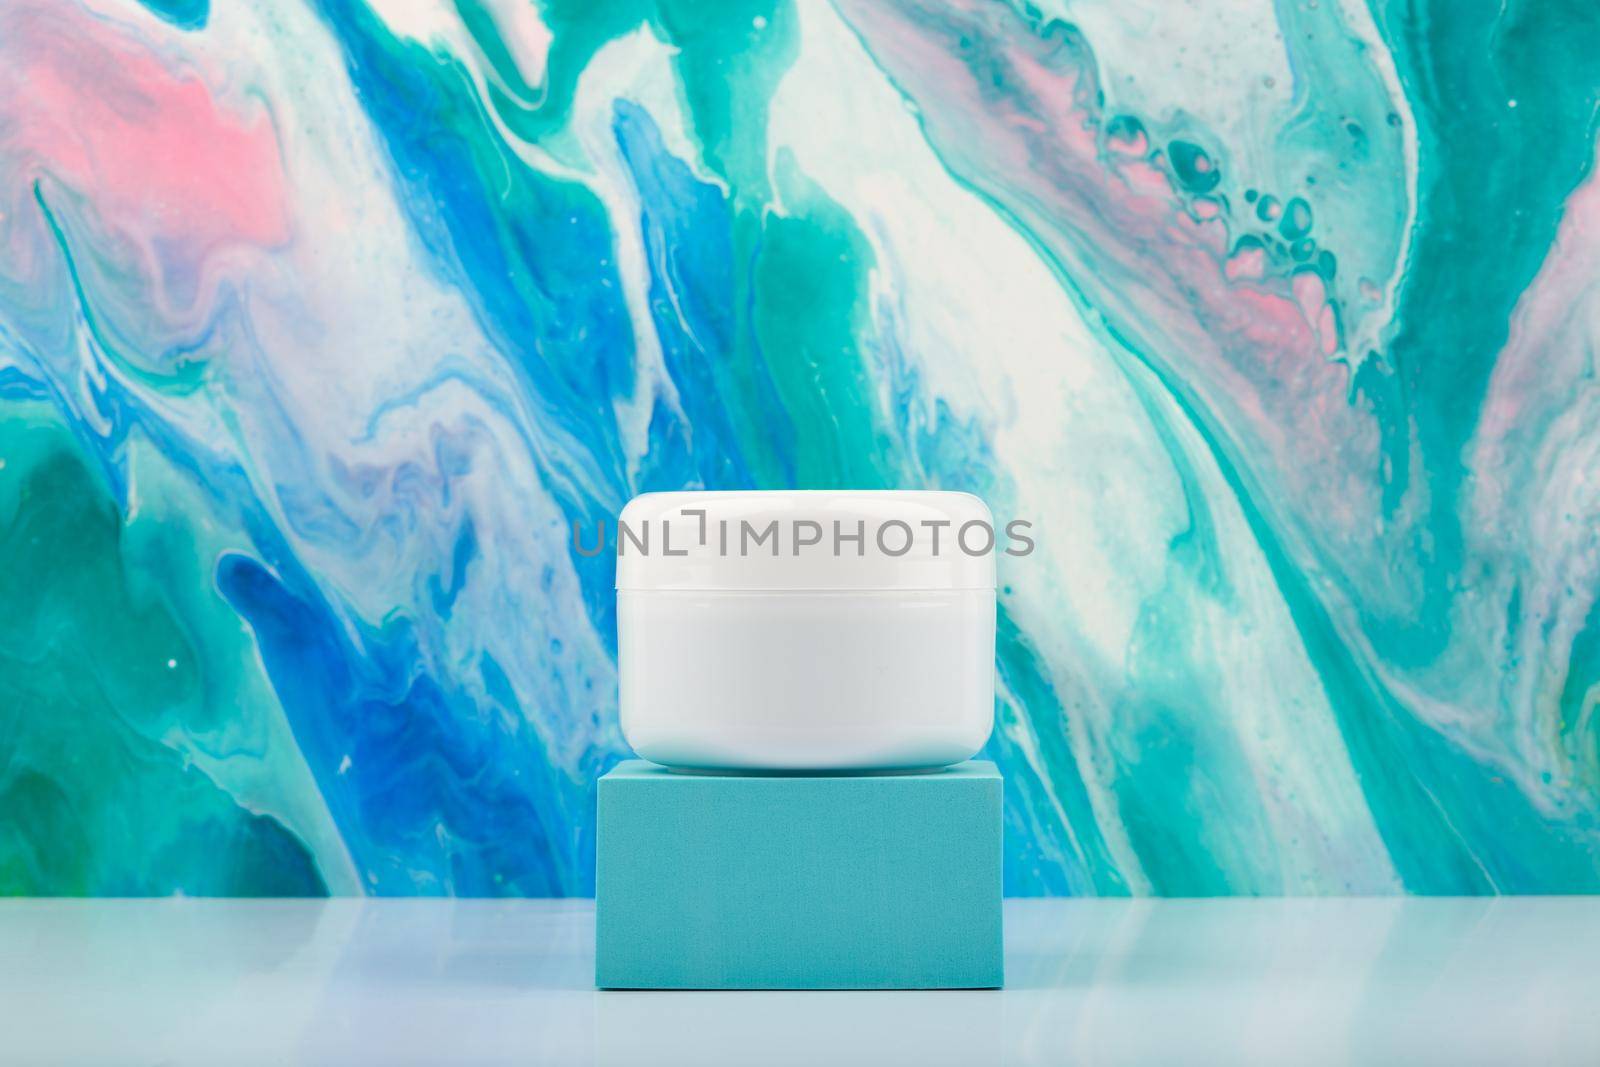 White cosmetic jar on blue podium and white table against marbled background in blue colors with copy space. High quality photo